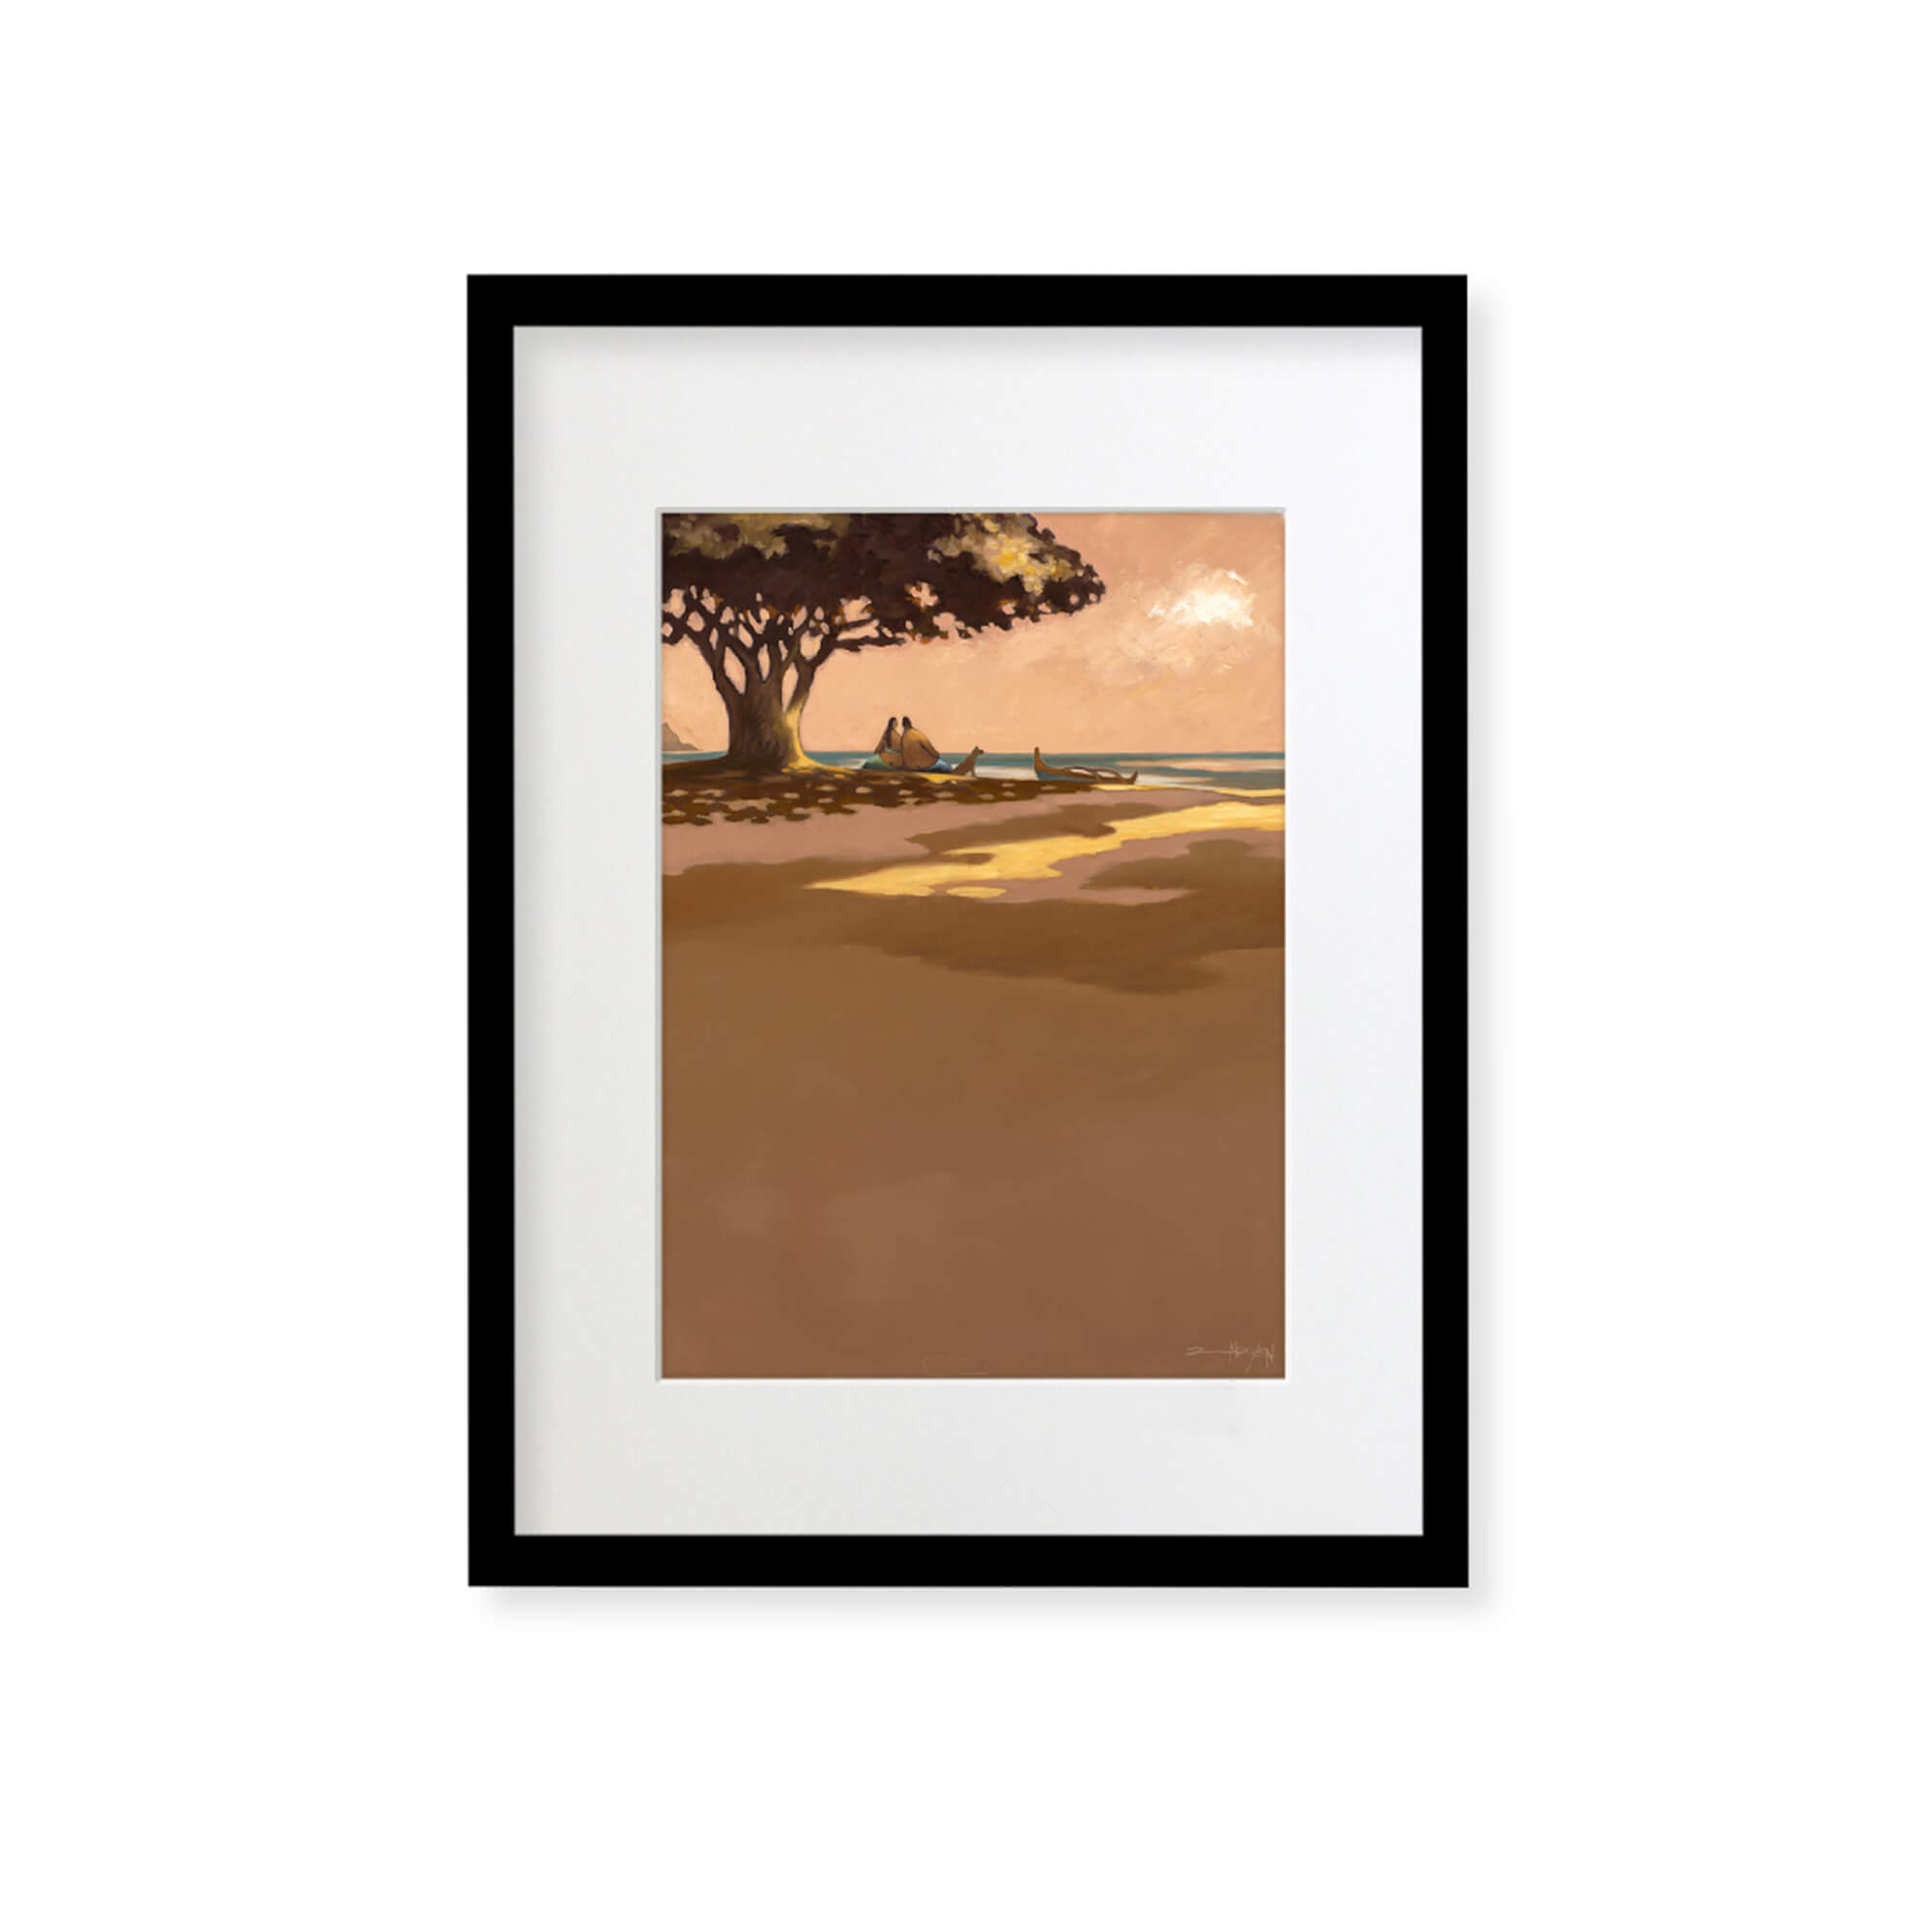 Framed matted art print of a couple and their dog enjoying a peaceful at the beach by Hawaii artist Tim Nguyen